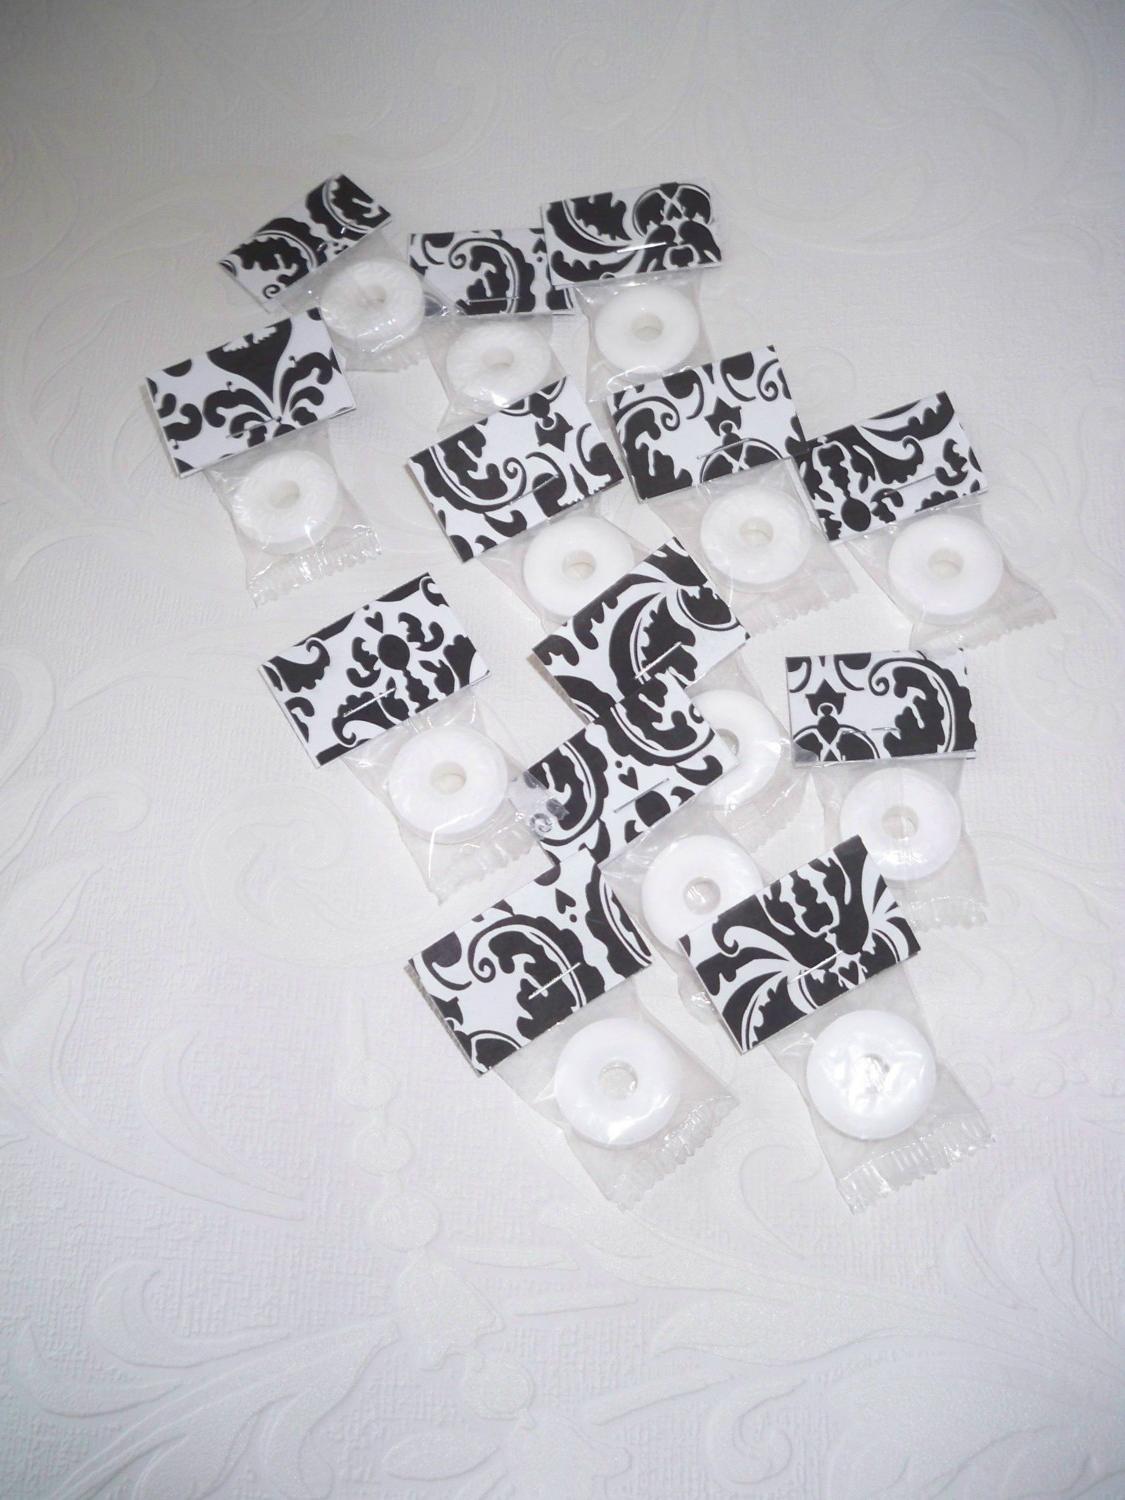 50 Favor Mints To Match Your Wedding Theme